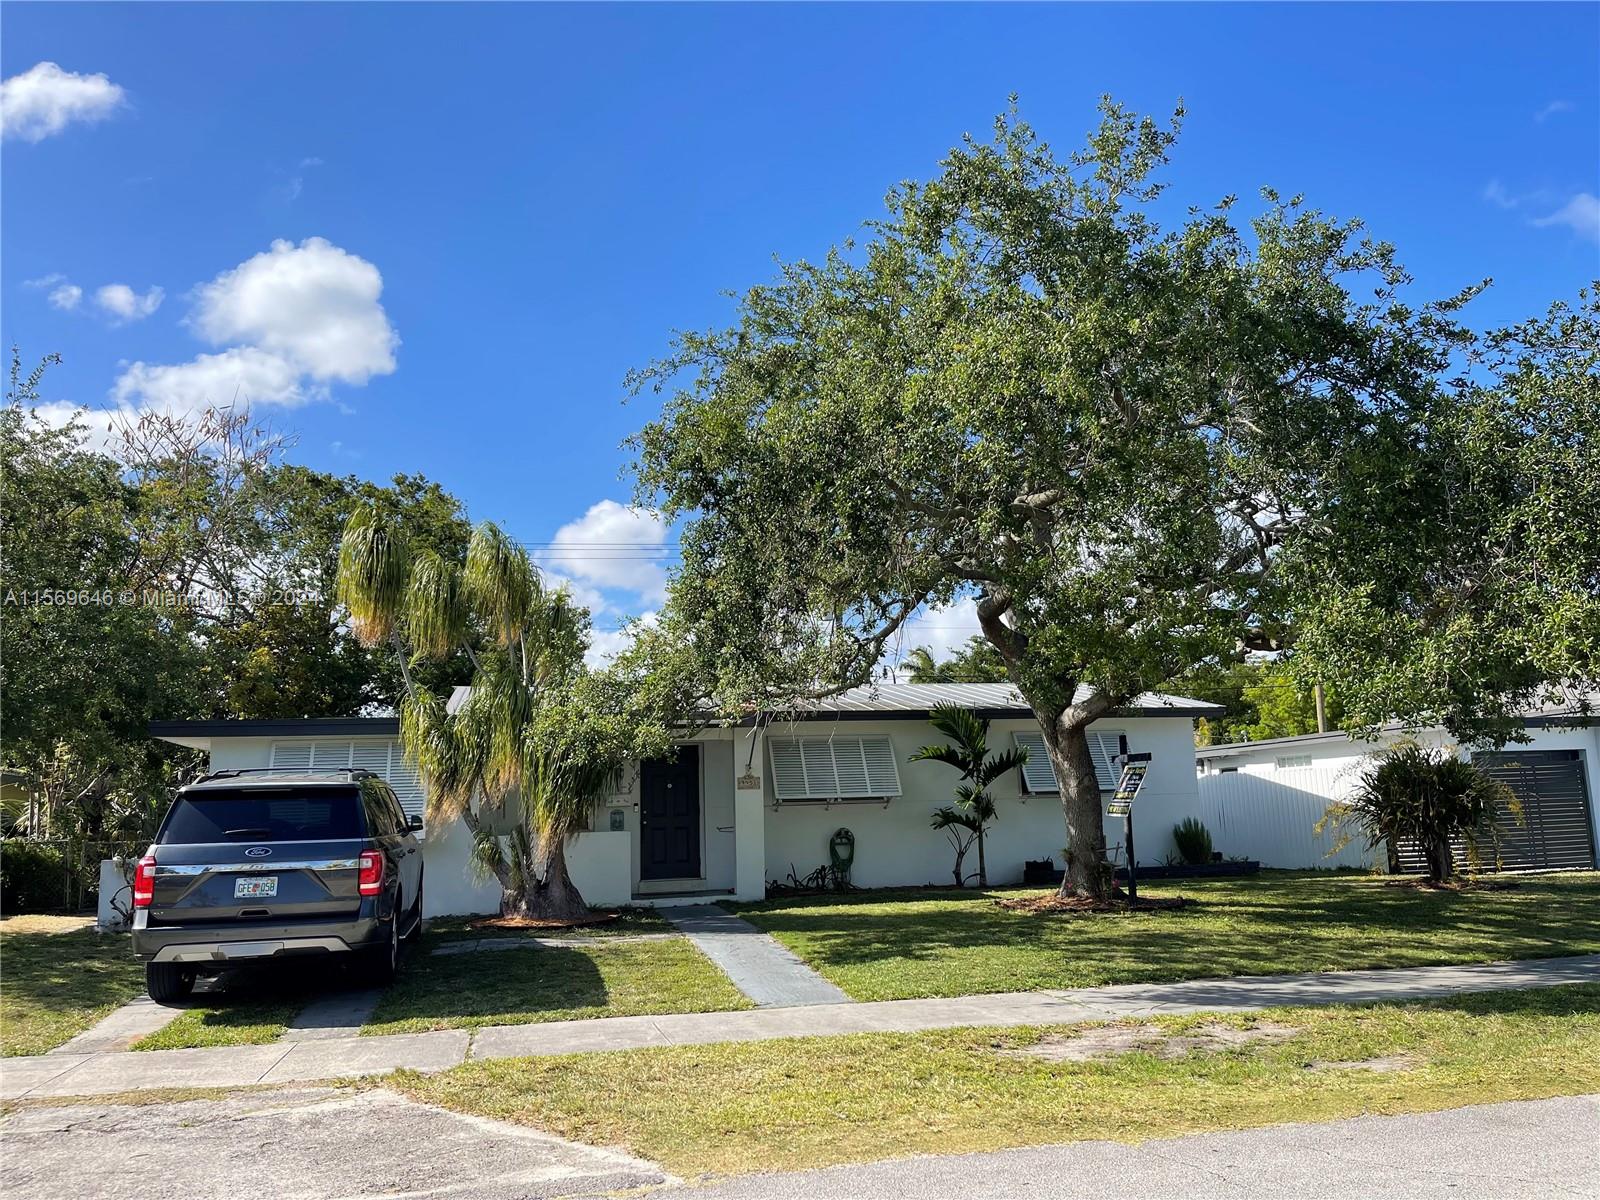 *** LOOKING FOR A HOME TO FIT A LARGE FAMILY OR NEED SPACE FOR YOUR IN-LAWS… LOOK NO FURTHER. THIS HOME HAS ALL THE SPACE YOU WILL NEED *** 6 BEDROOMS 2 BATH ***  METAL ROOF *** VERY SPACIOUS LAYOUT WITH PLENTY OF NATURAL LIGHT *** ROOM FOR A BOAT *** LOCATED ON QUIET TREE-LINED STREET IN DESIRABLE CUTLER BAY *** OUR COMMUNITY HAS MANY FAMILY EVENTS LIKE GOLF CART PARADES, CHILI COOK OFFS, WING FESTS PLUS MUCH MORE *** CLOSE TO SHOPPING, TURNPIKE, AND POPULAR BLACK POINT MARINA *** BRING YOUR OFFERS AND START ENJOYING SOUTH FLORIDA LIVING ***